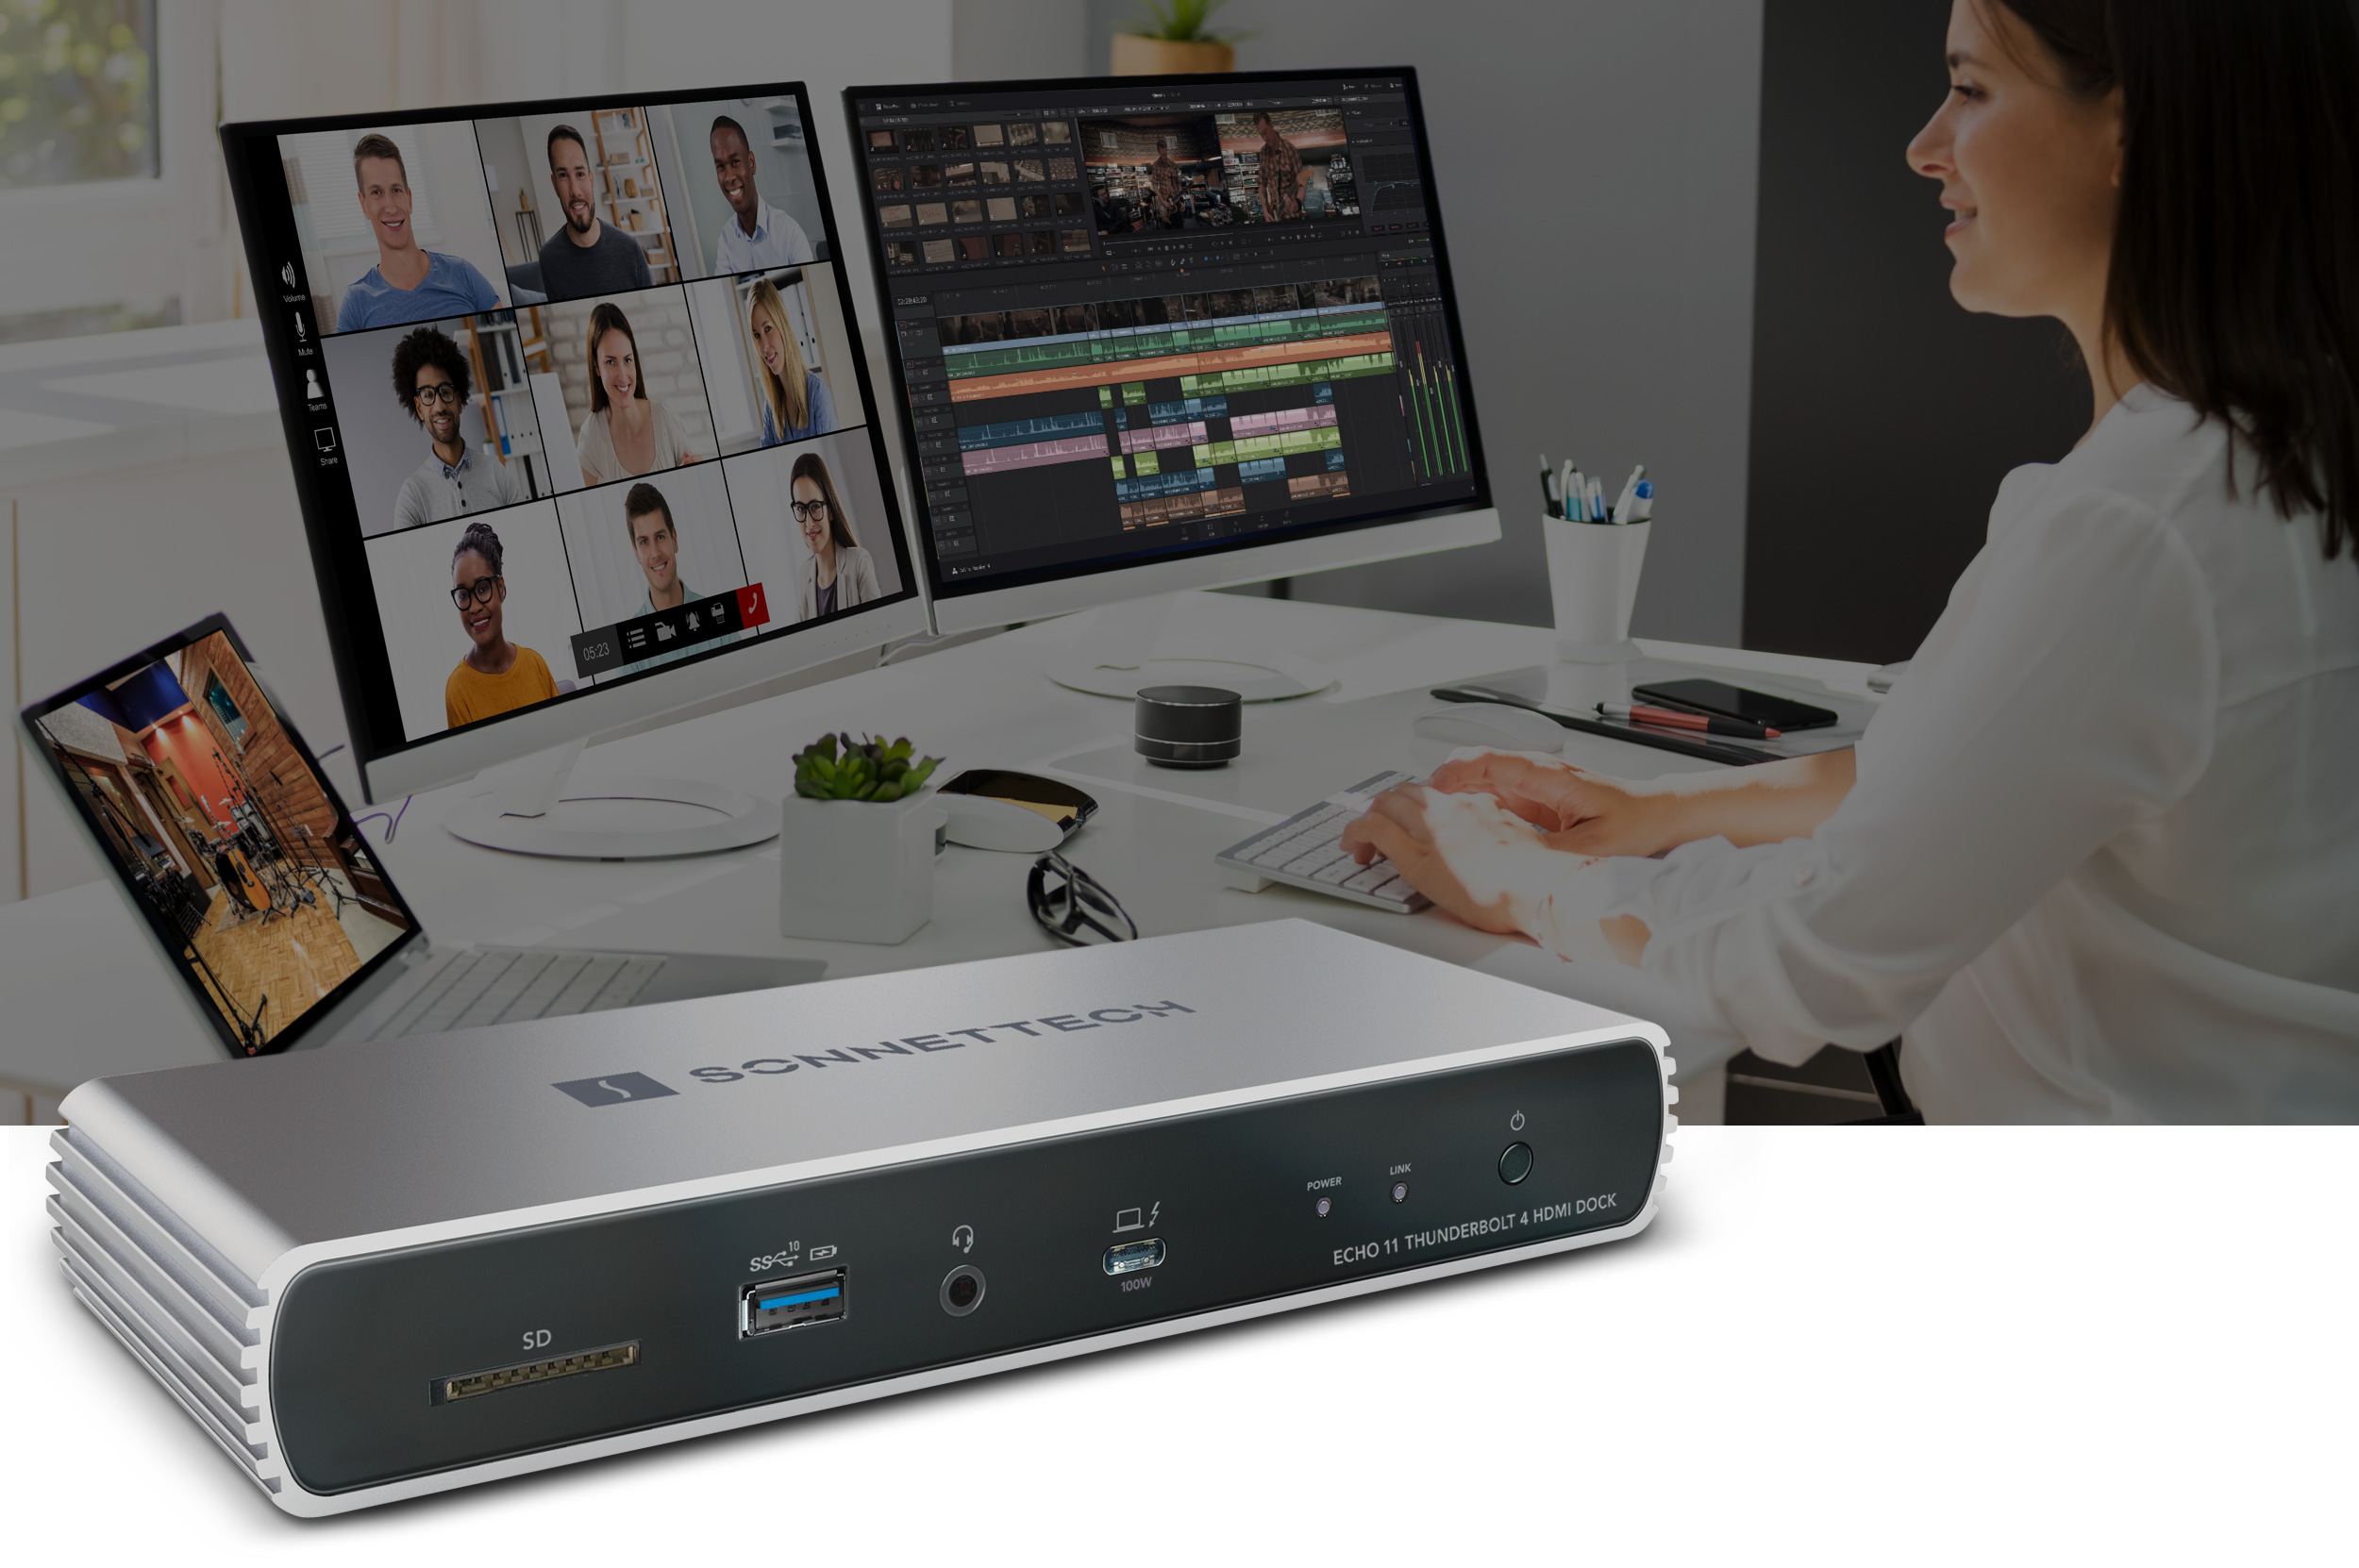 Echo 11 Thunderbolt 4 HDMI Dock - All the Right Connections